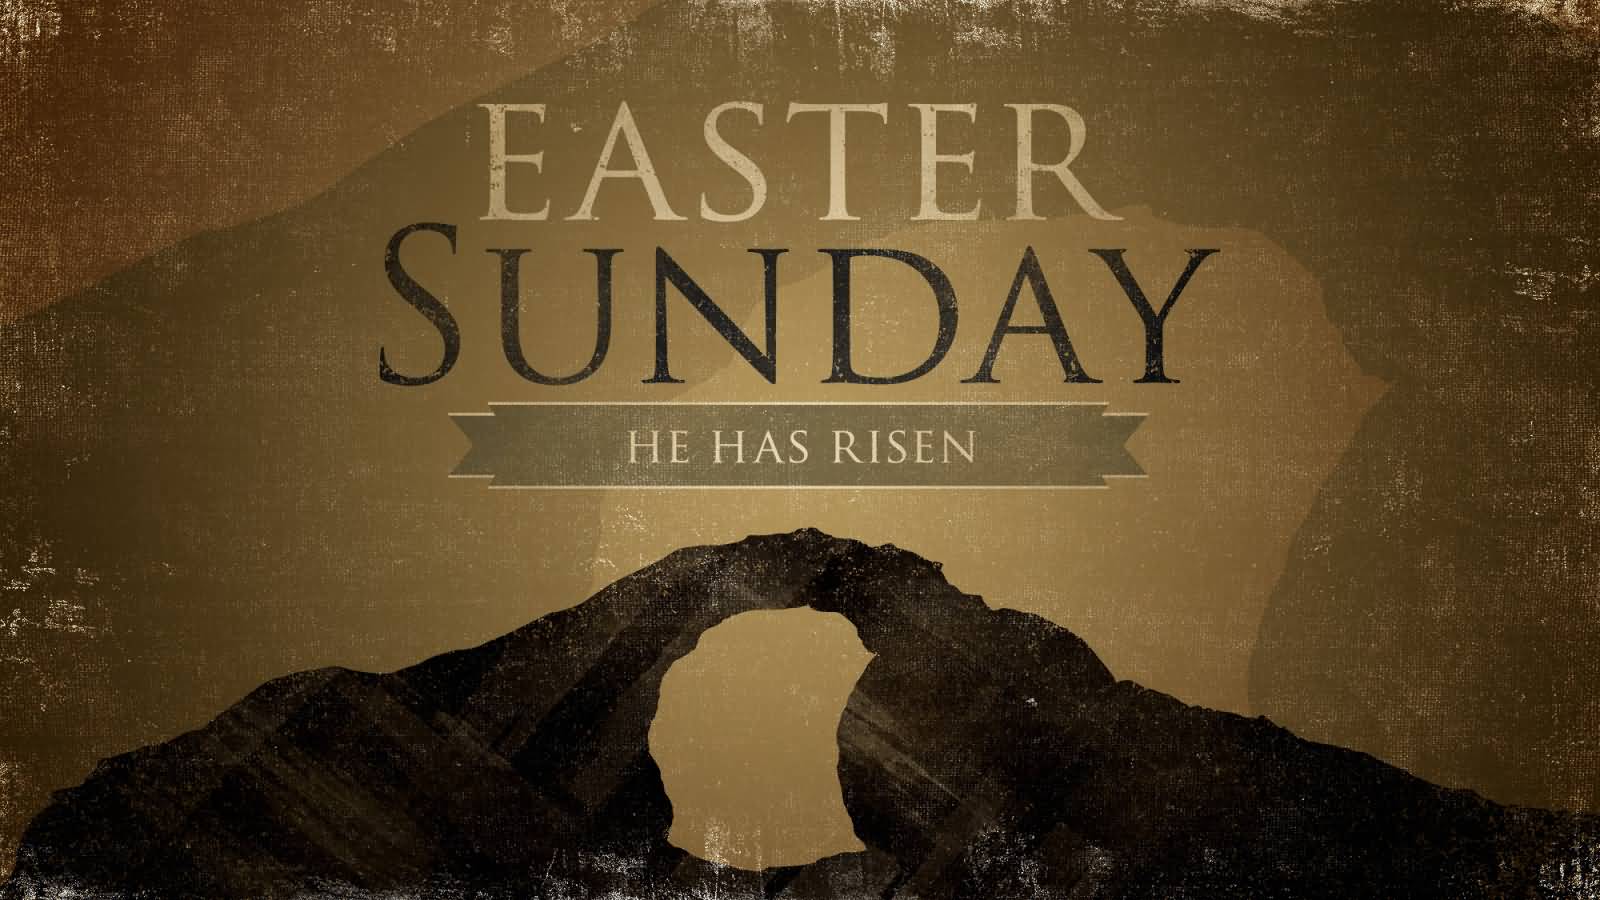 Best Easter Sunday 2017 Wish Picture And Image